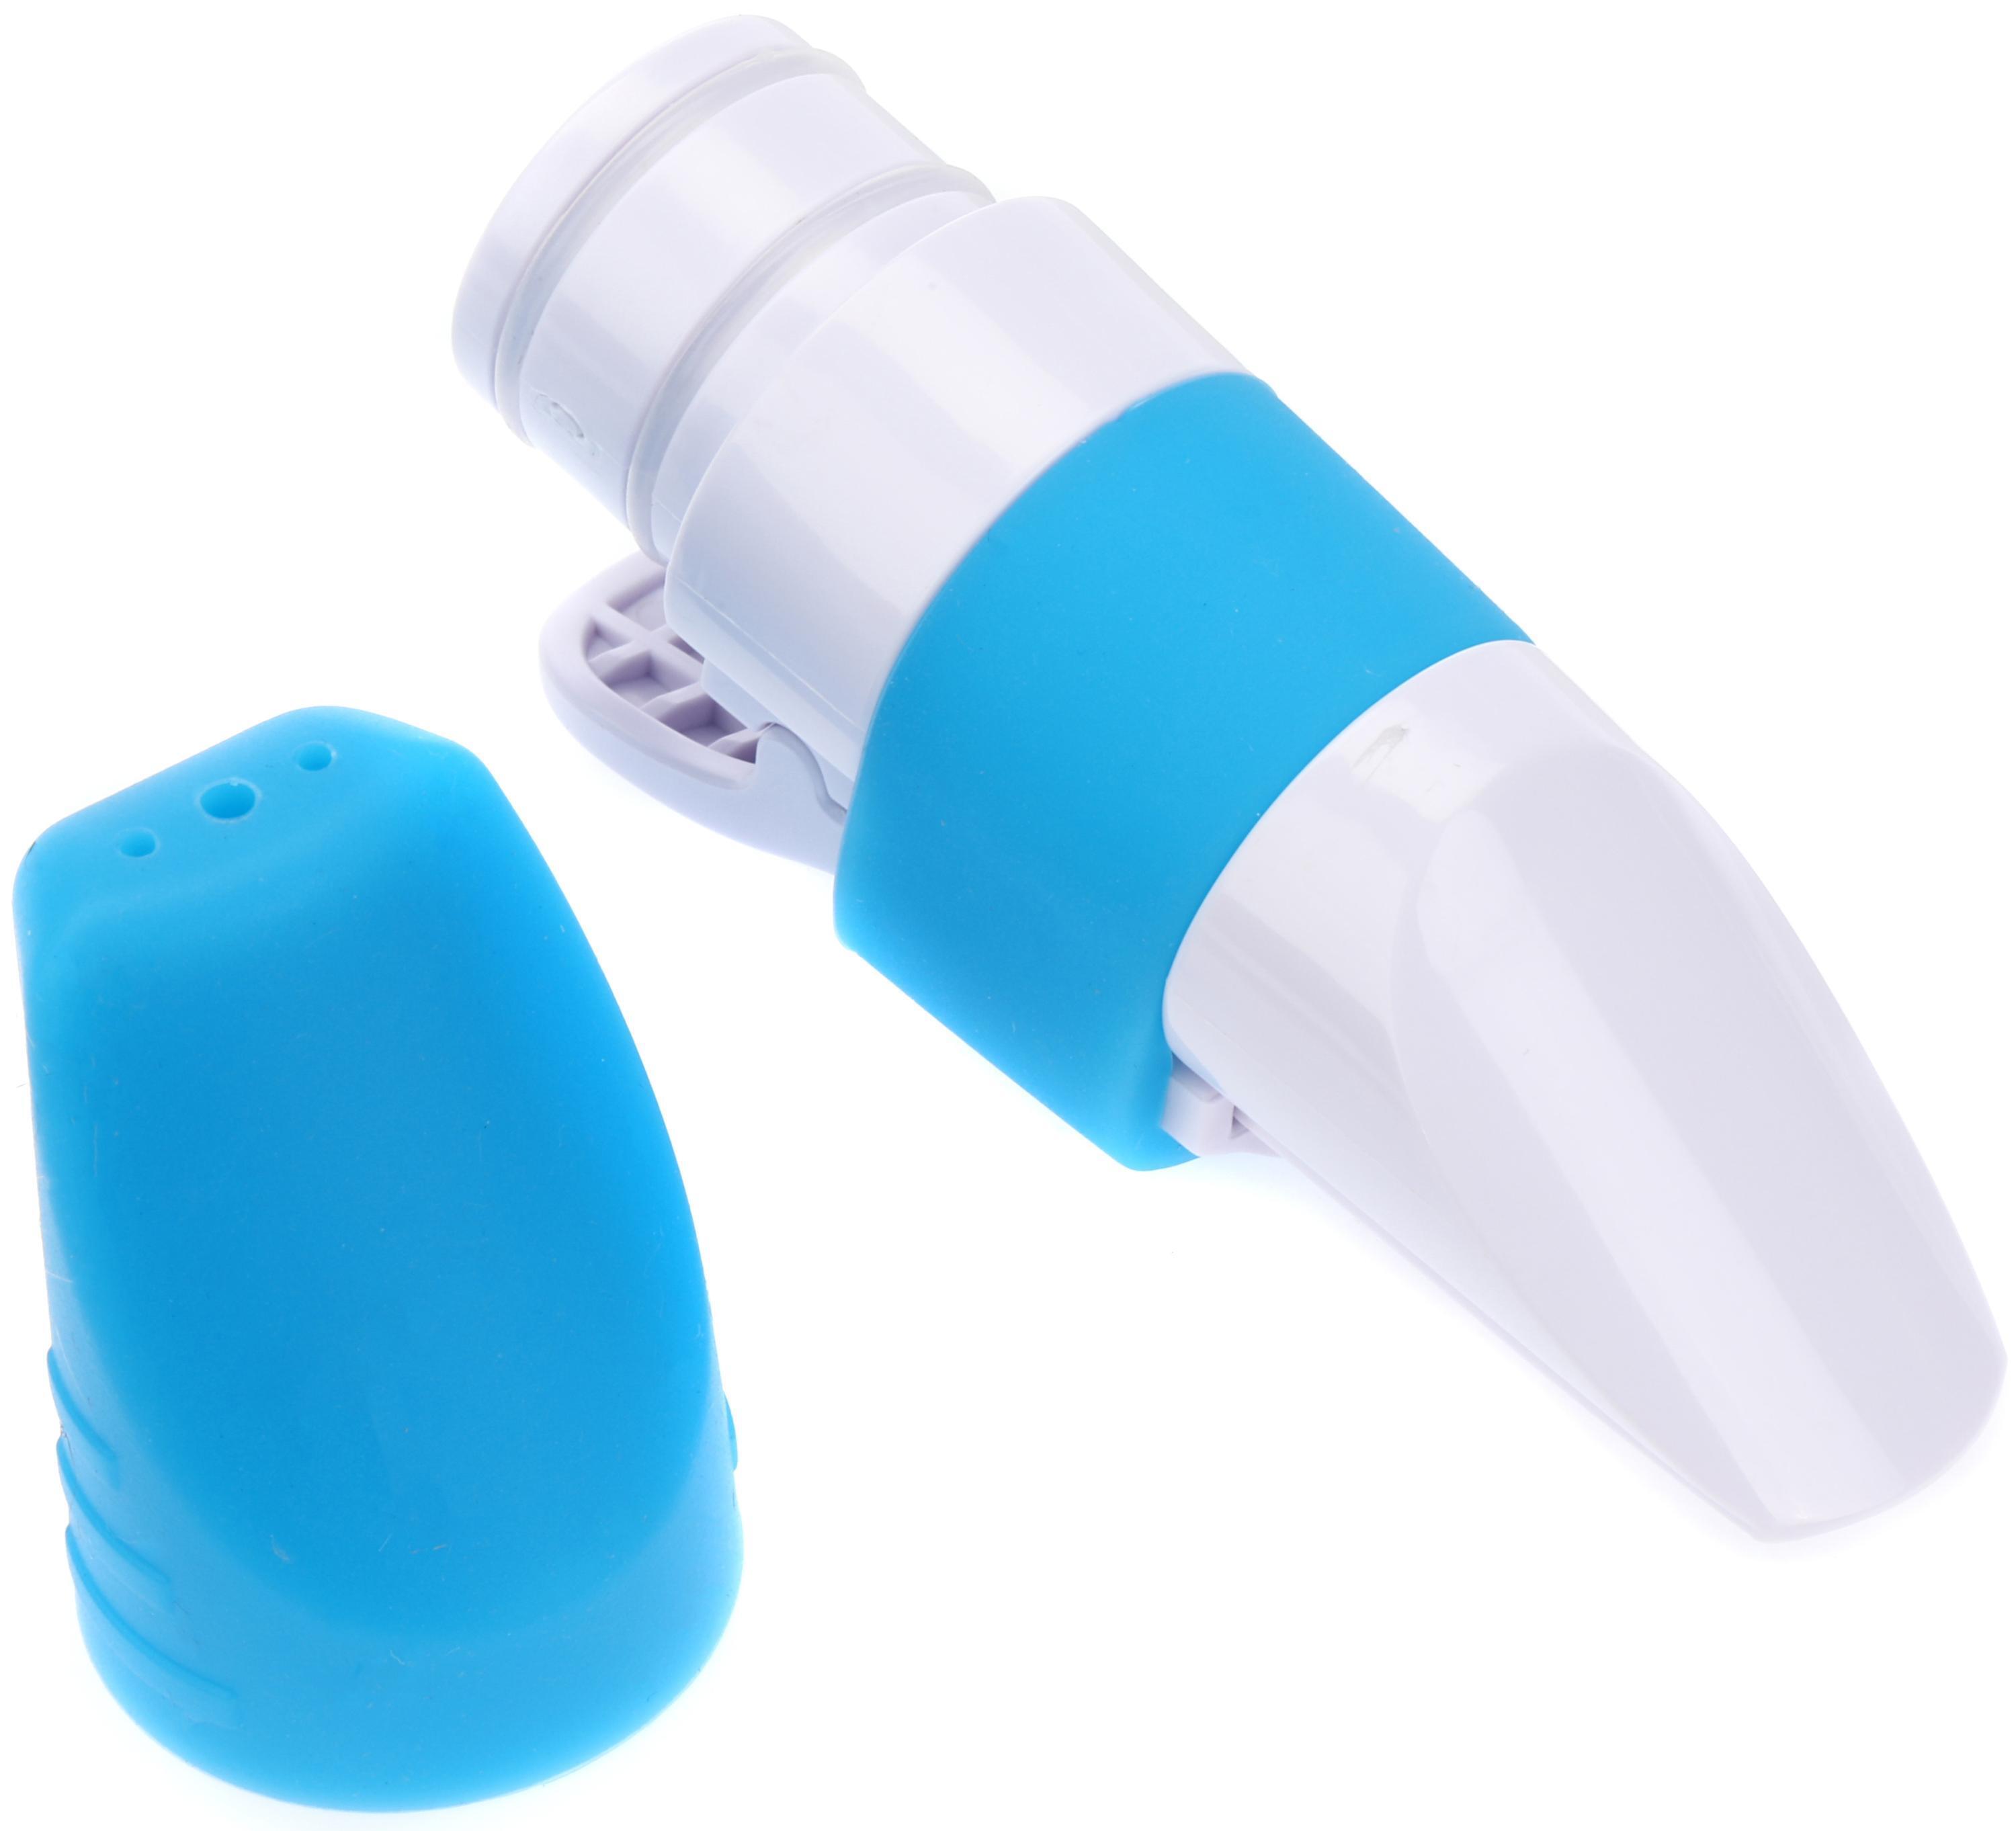 Nuvo N160MPBL Dood/Clarinéo Mouthpiece - White/Blue | Sweetwater